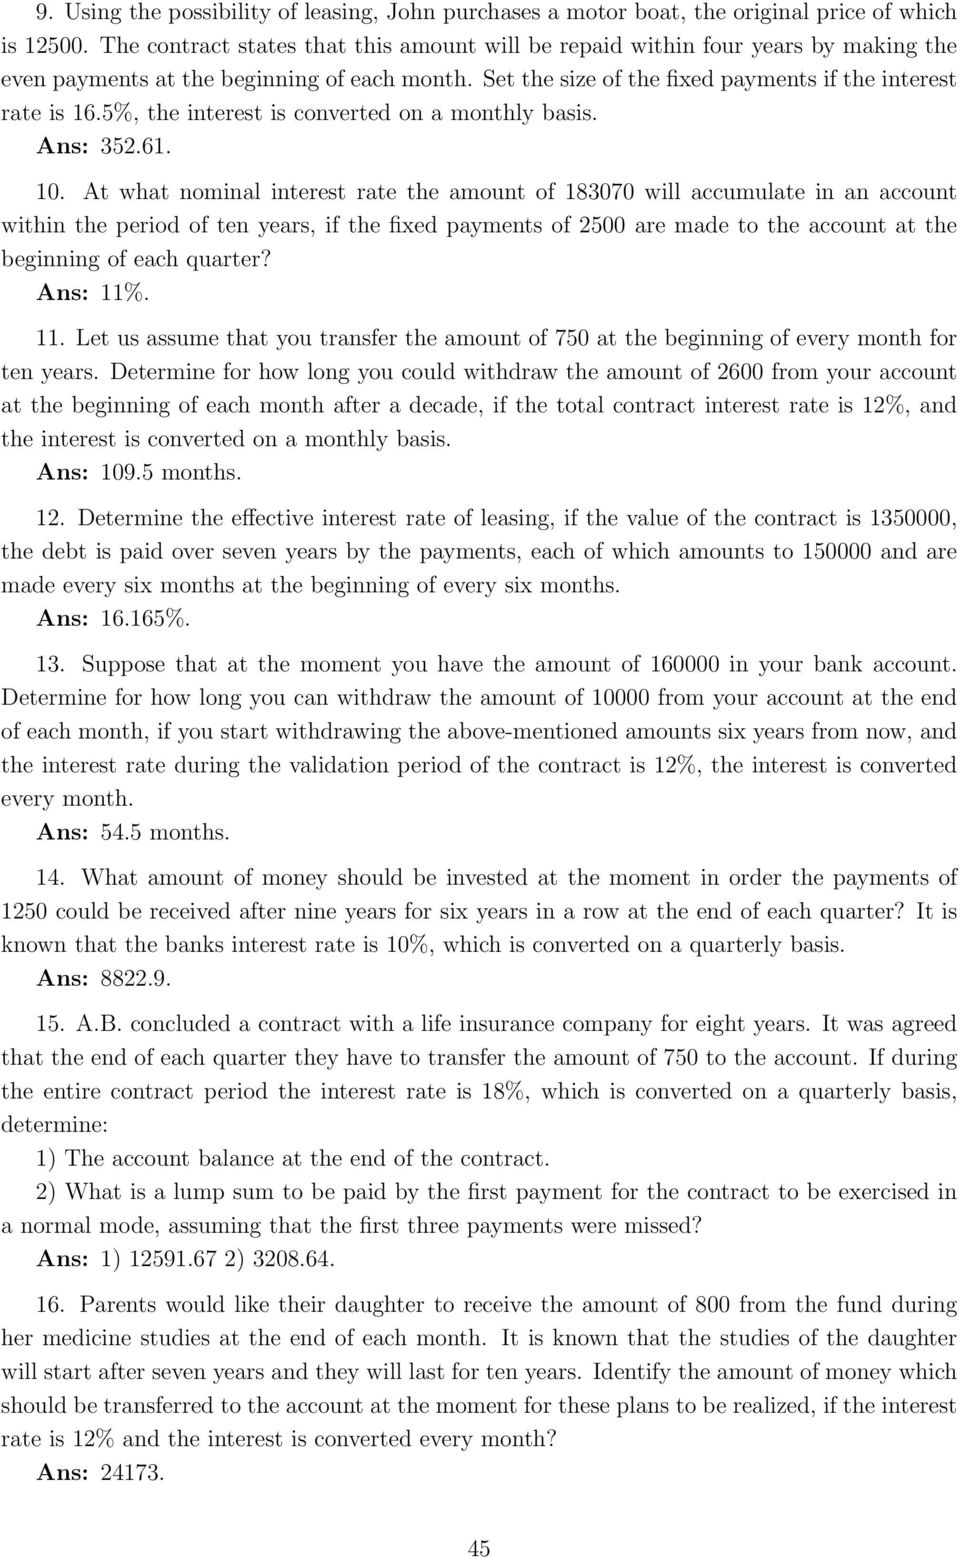 183070 will accumulate in an account within the period of ten years, if the fixed payments of 2500 are made to the account at the beginning of each quarter?